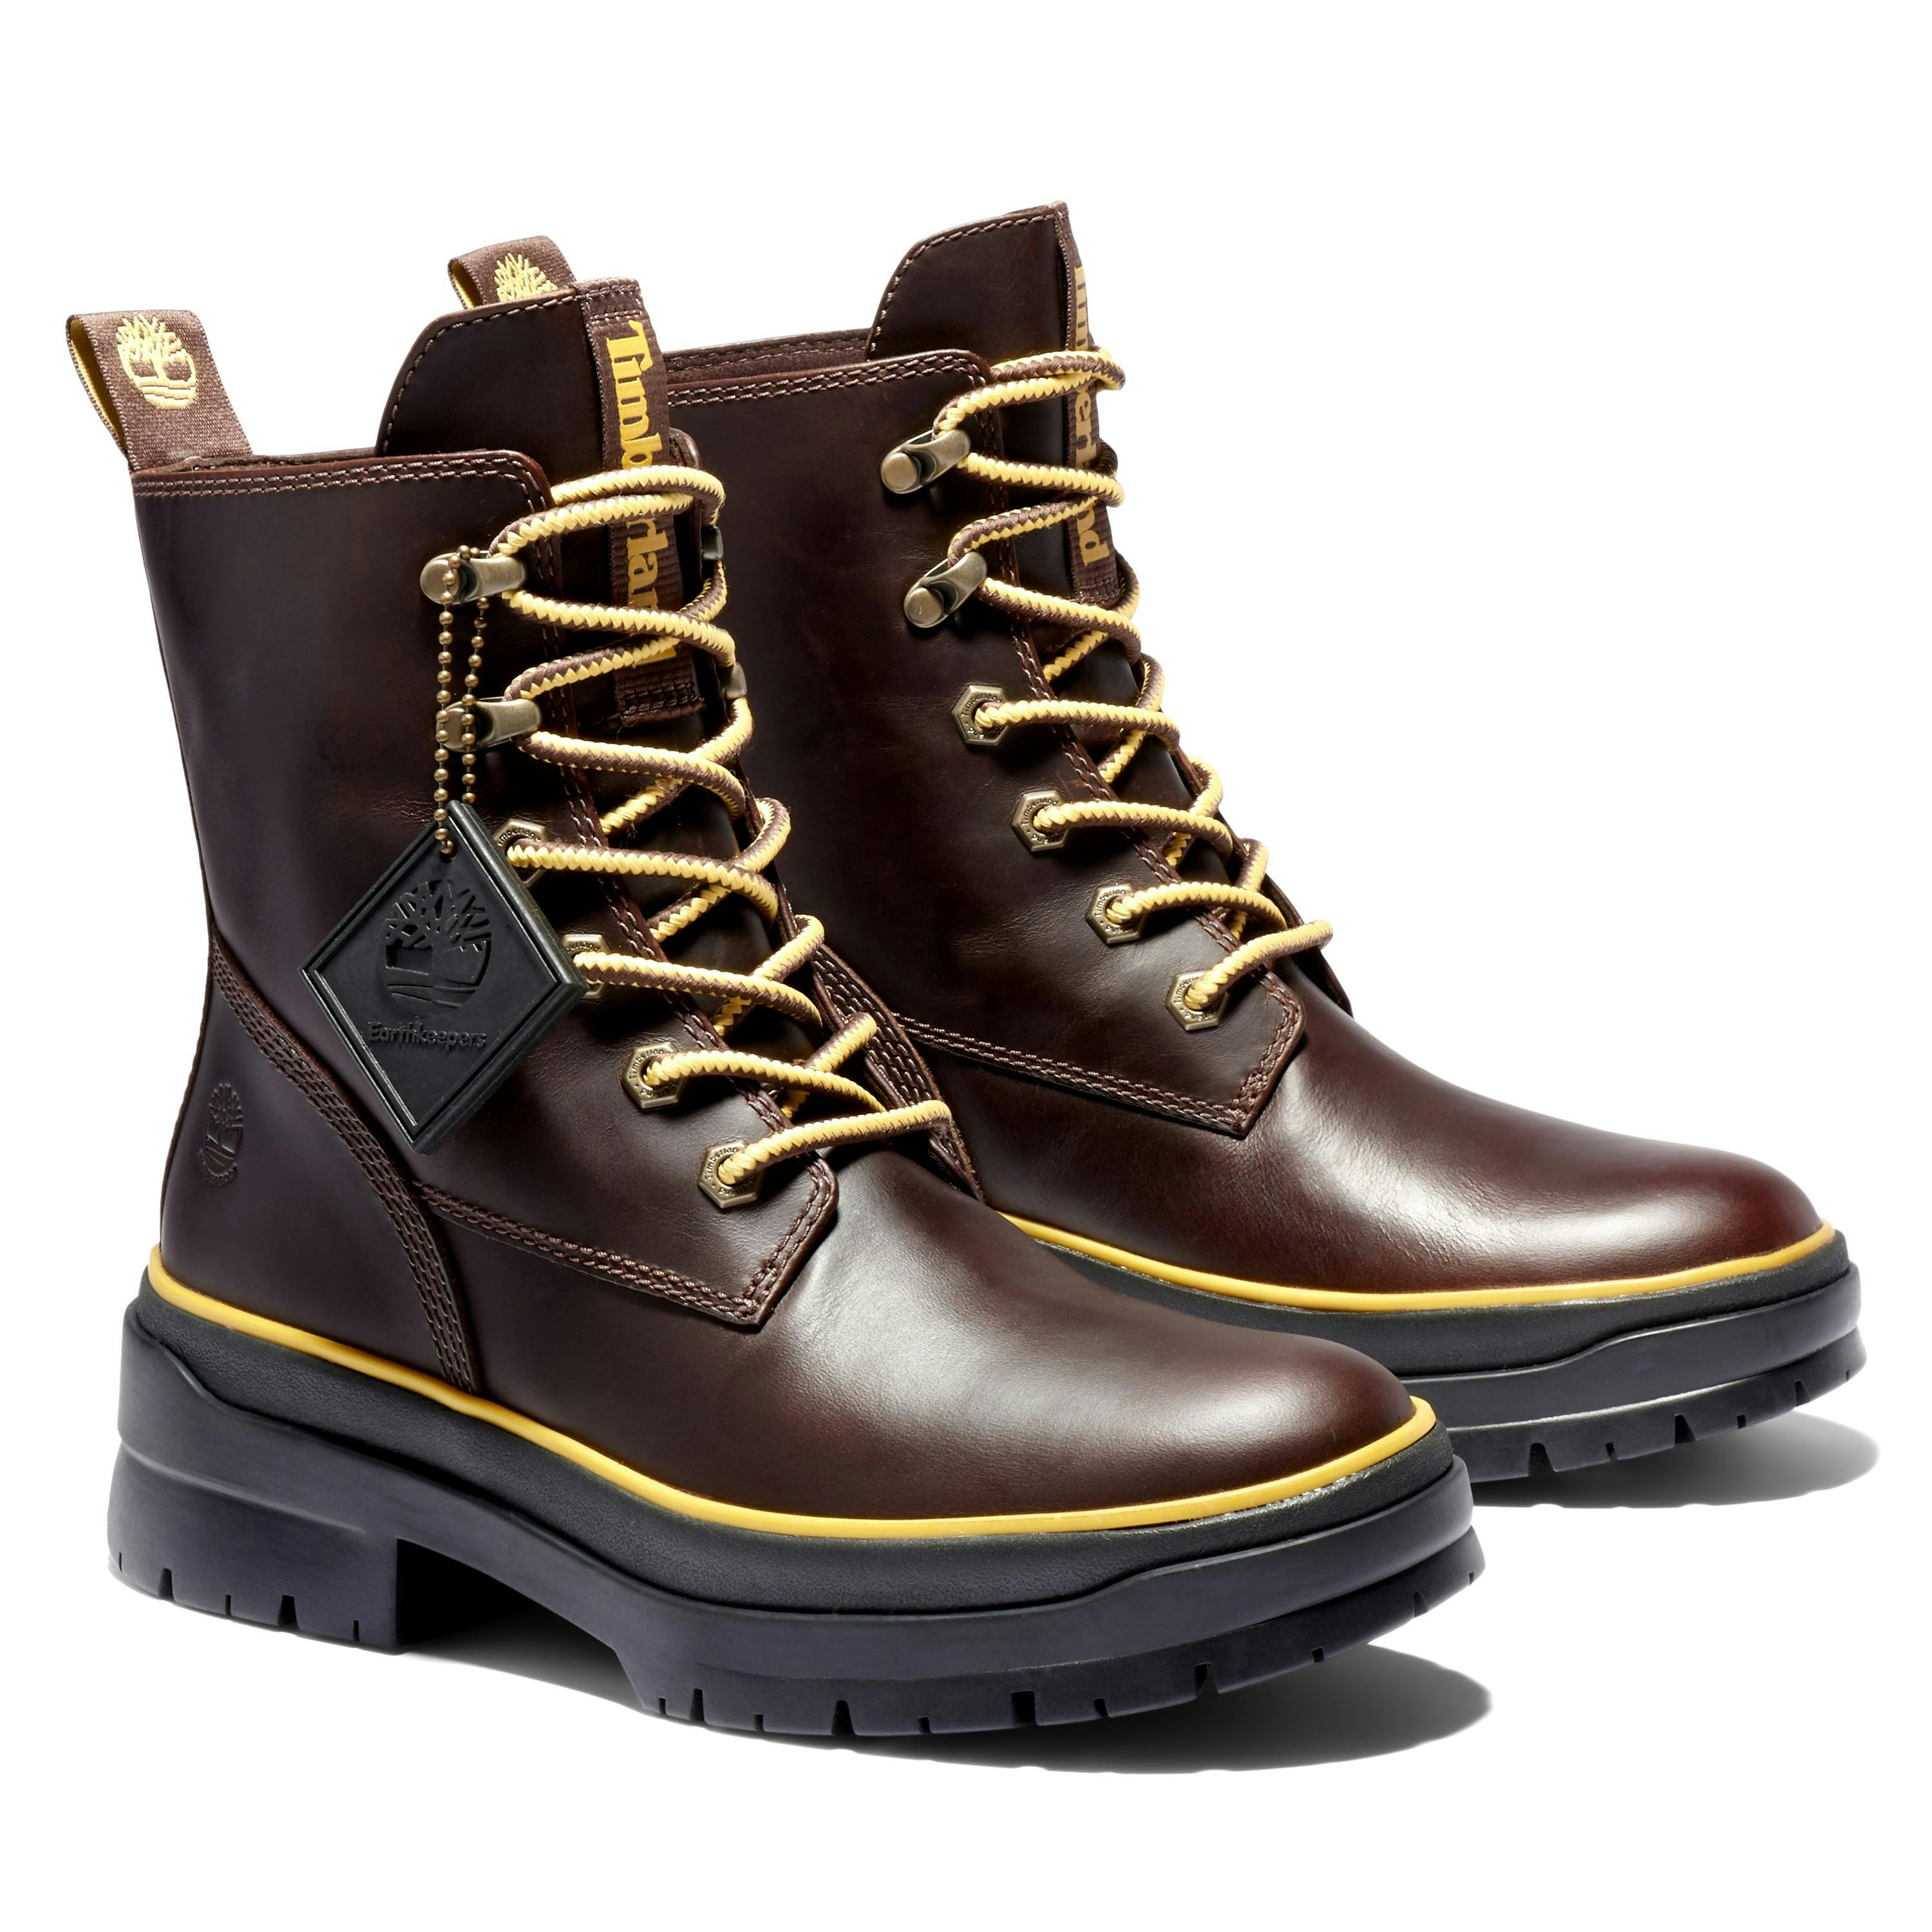 ecomm footwear shoe clothing apparel boot